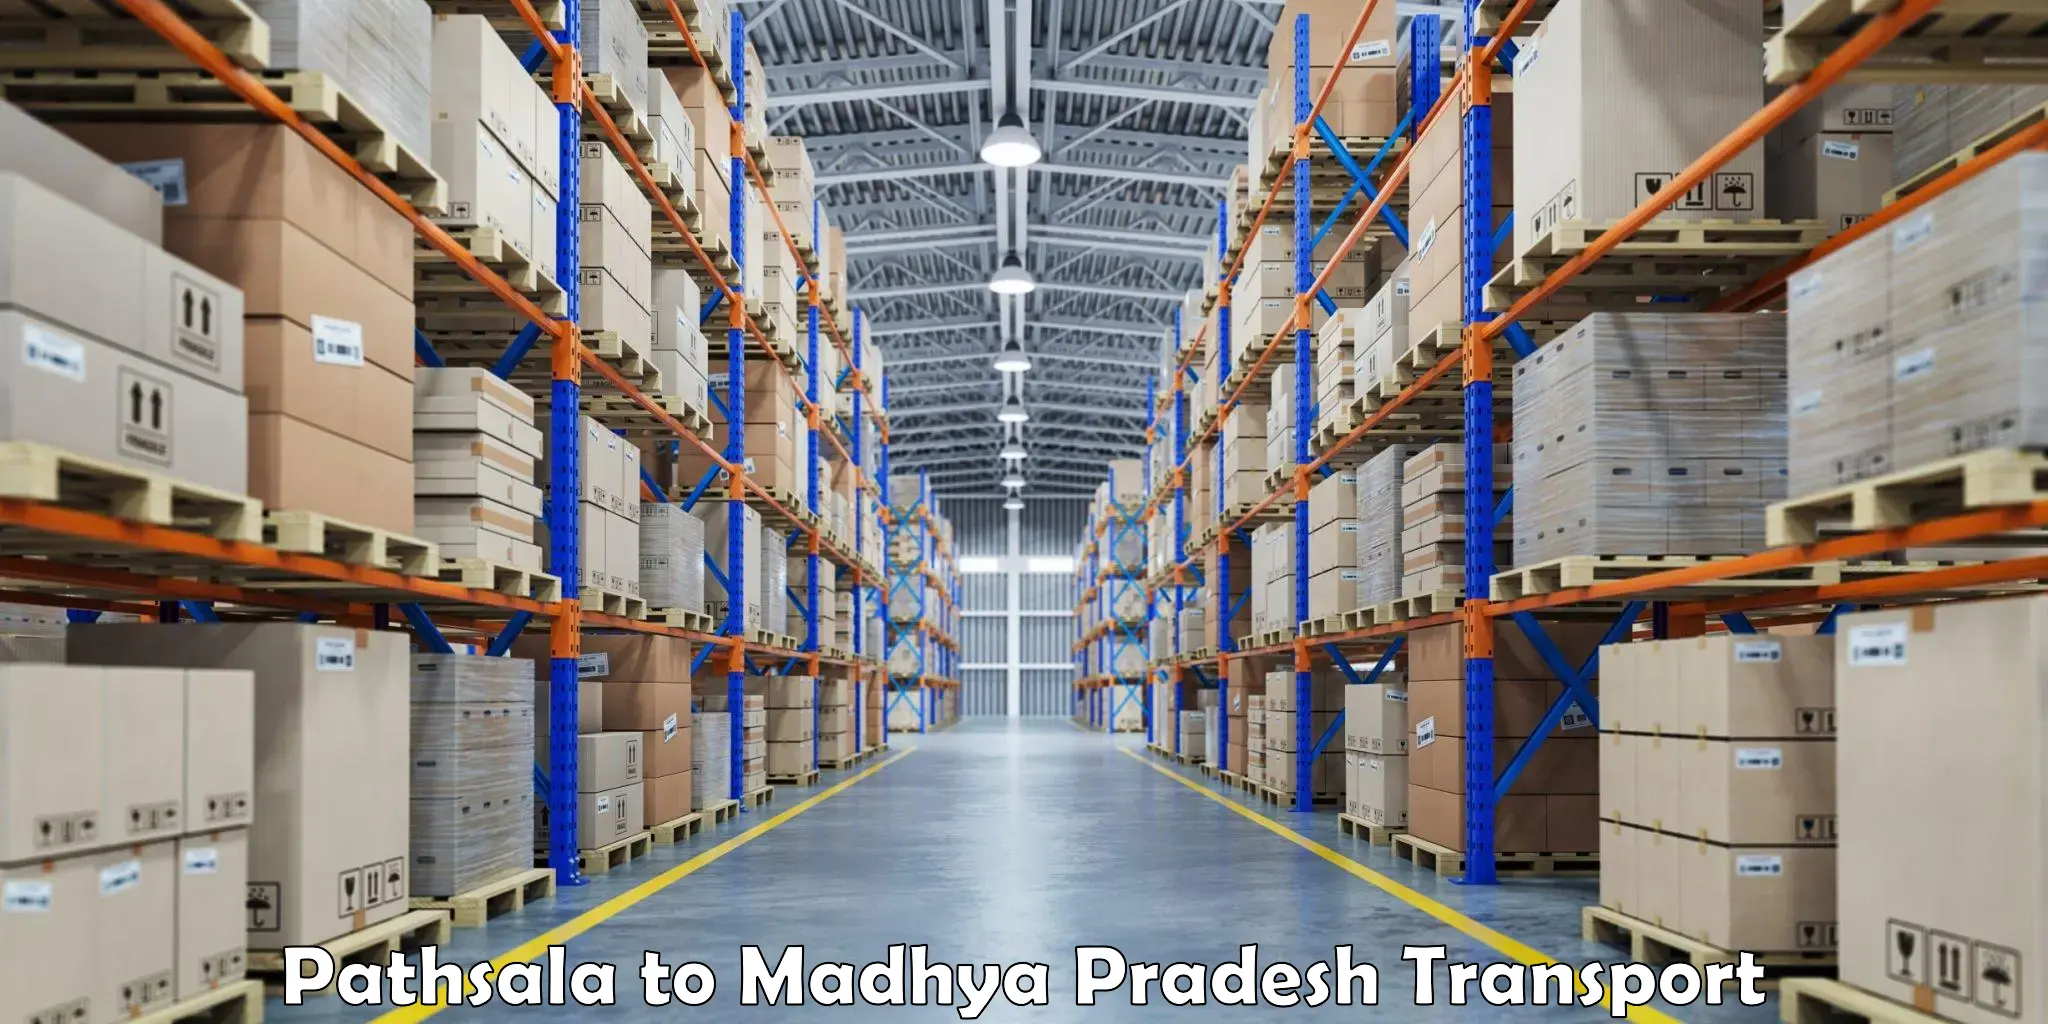 Truck transport companies in India Pathsala to Khategaon